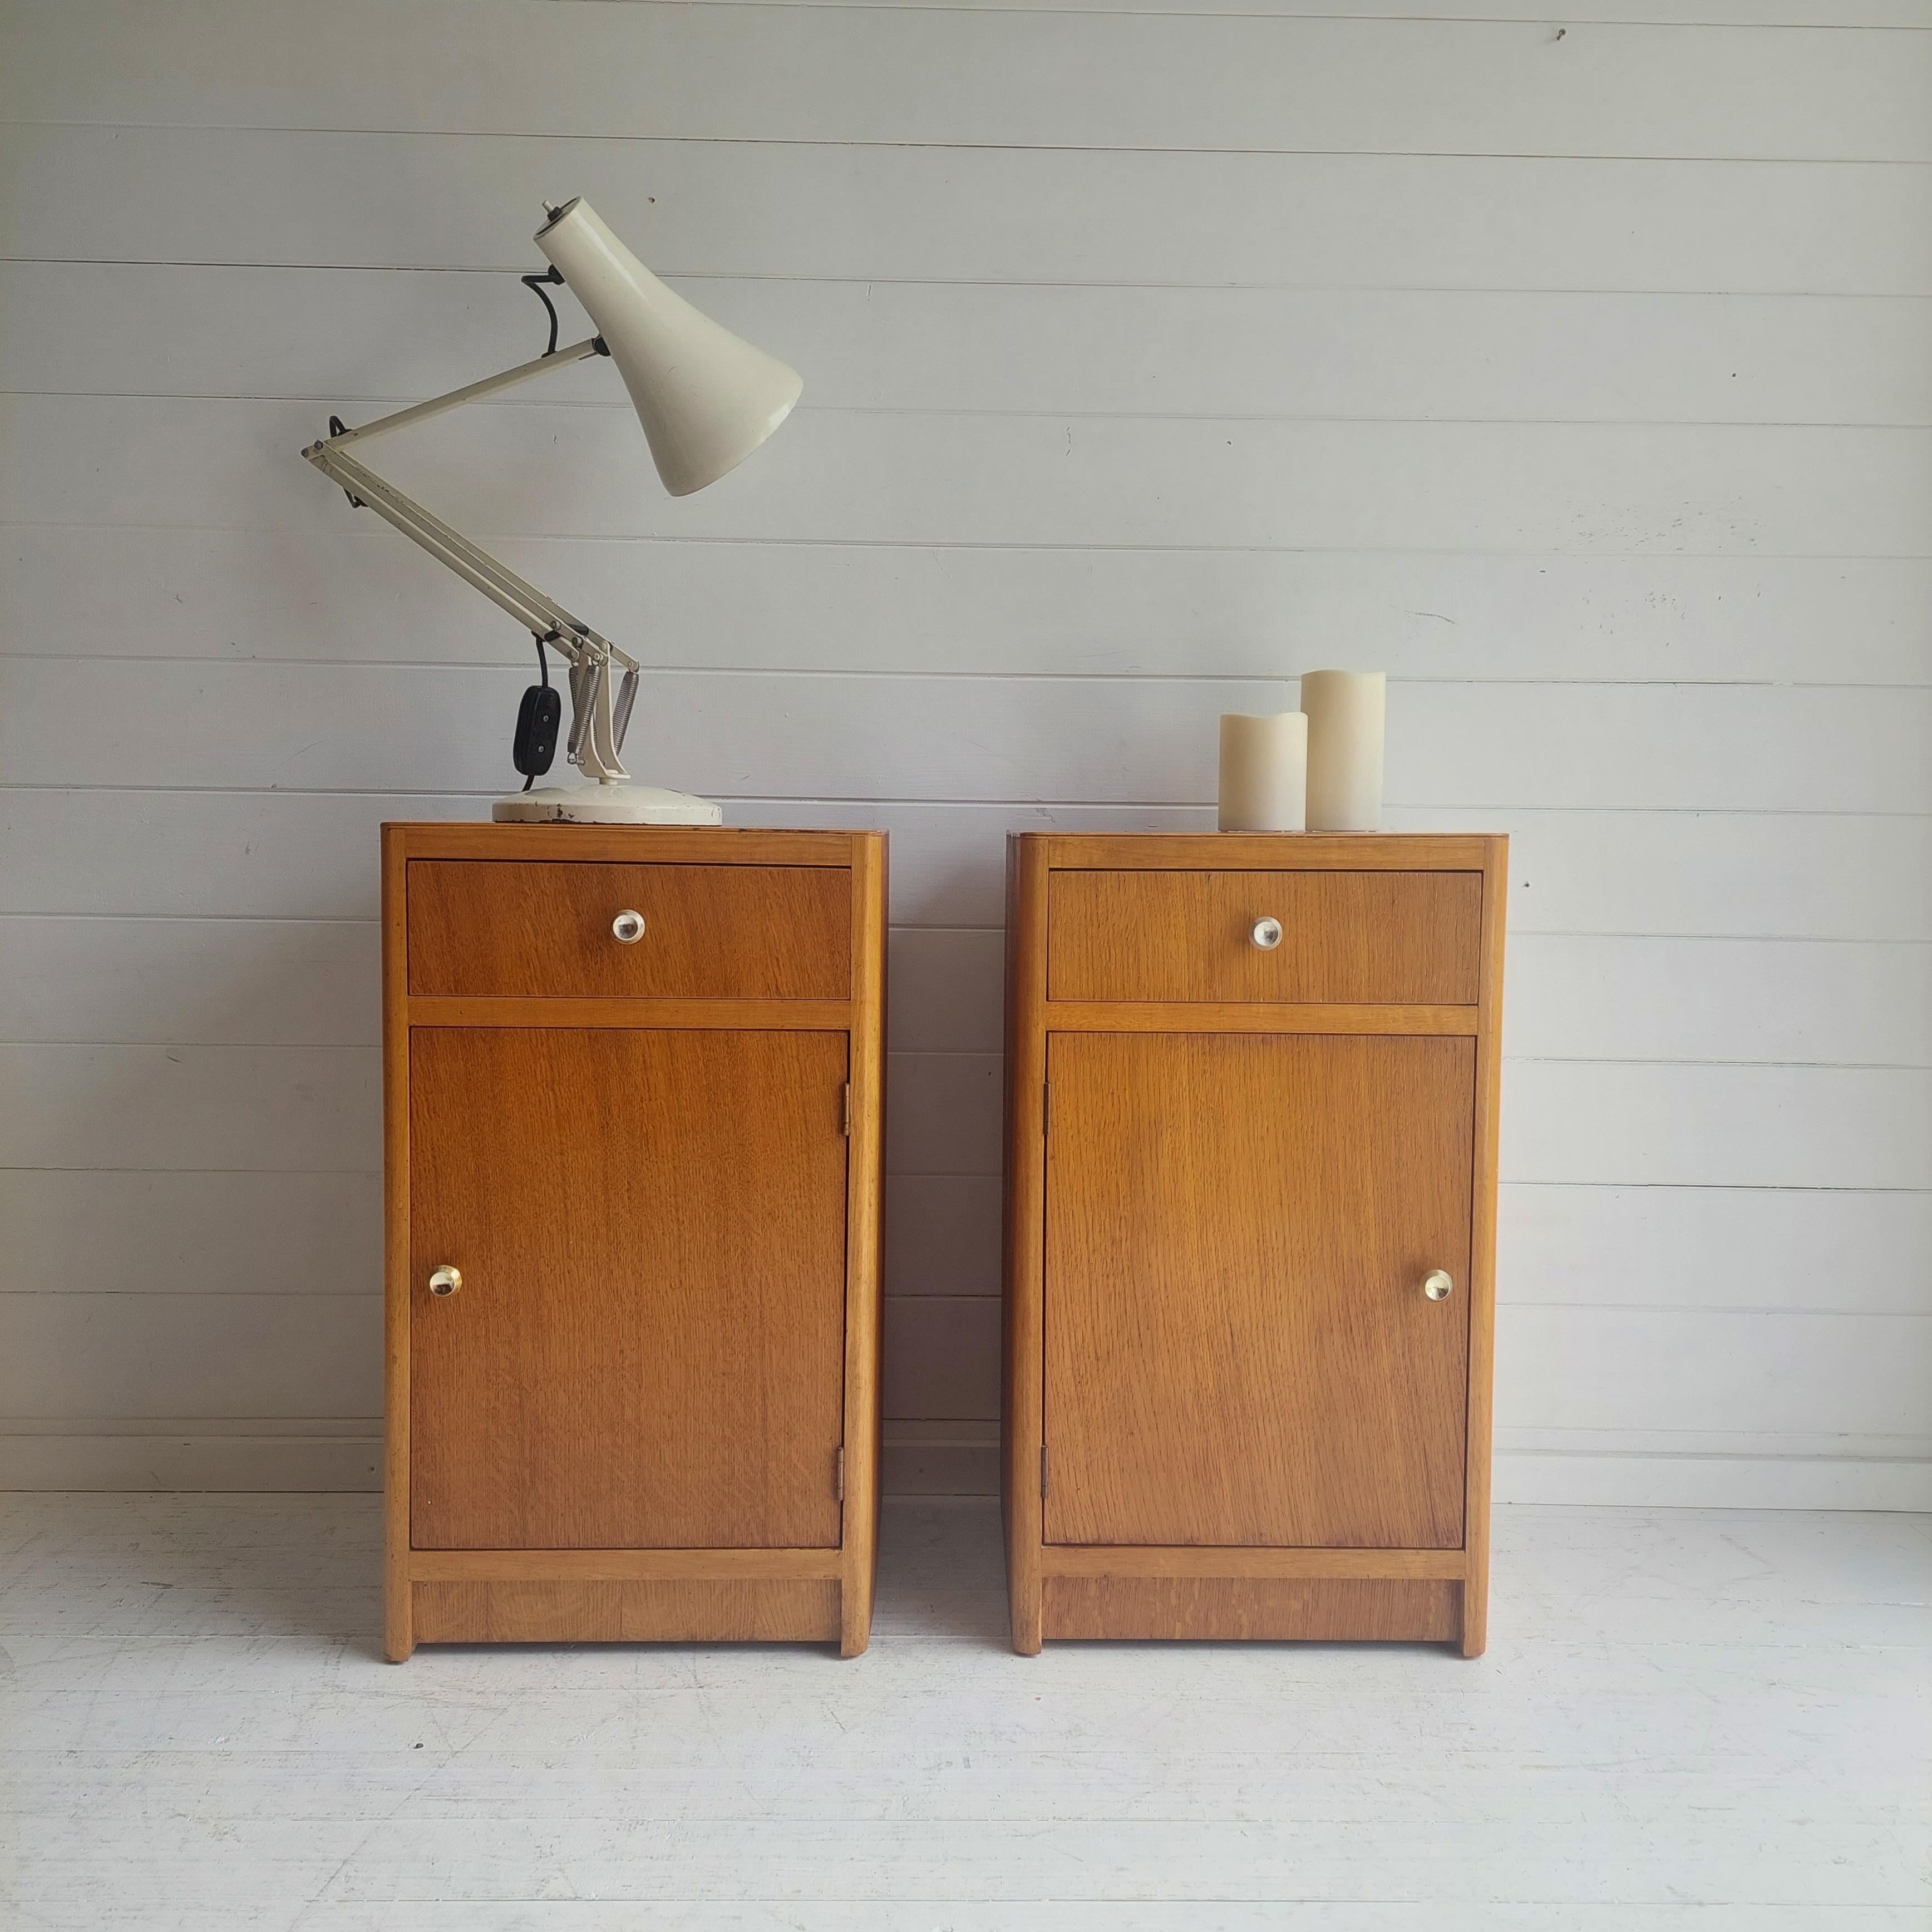 Pair of Vintage Bedside Cabinets
Trully beautiful abd difficult to come across a pair.

Made probably by Meredew in the 1950s, this petite pair of oak cabinets with brass knobs are designed to sit either side of the bed. 
Each has a drawer and